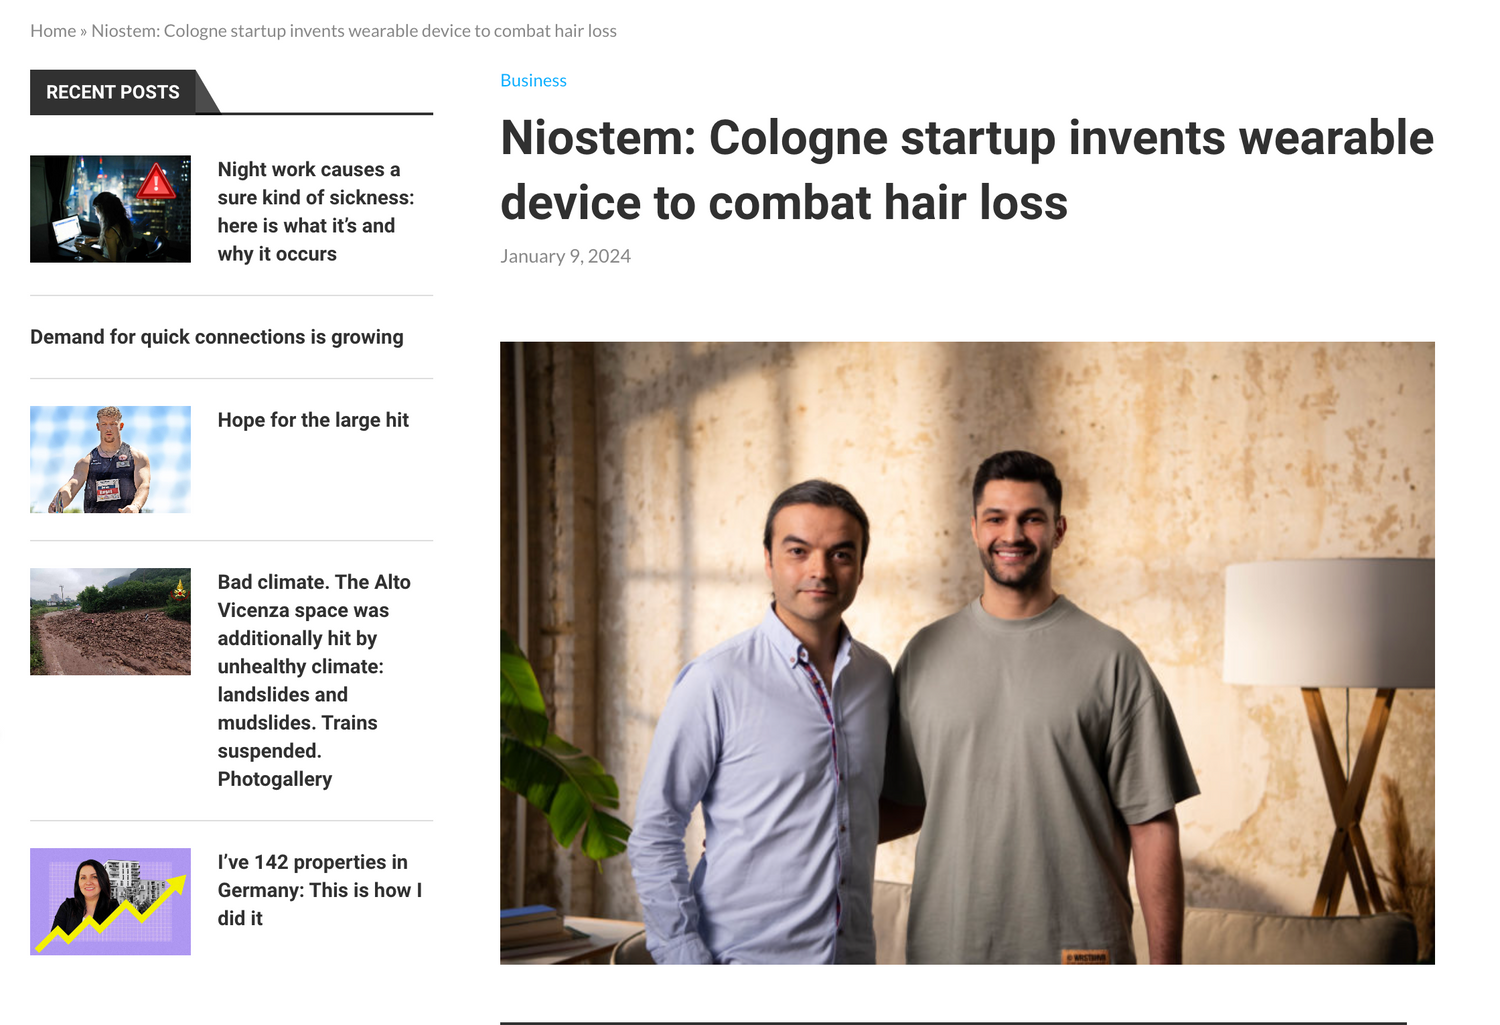 Niostem: Cologne startup invents wearable device to combat hair loss